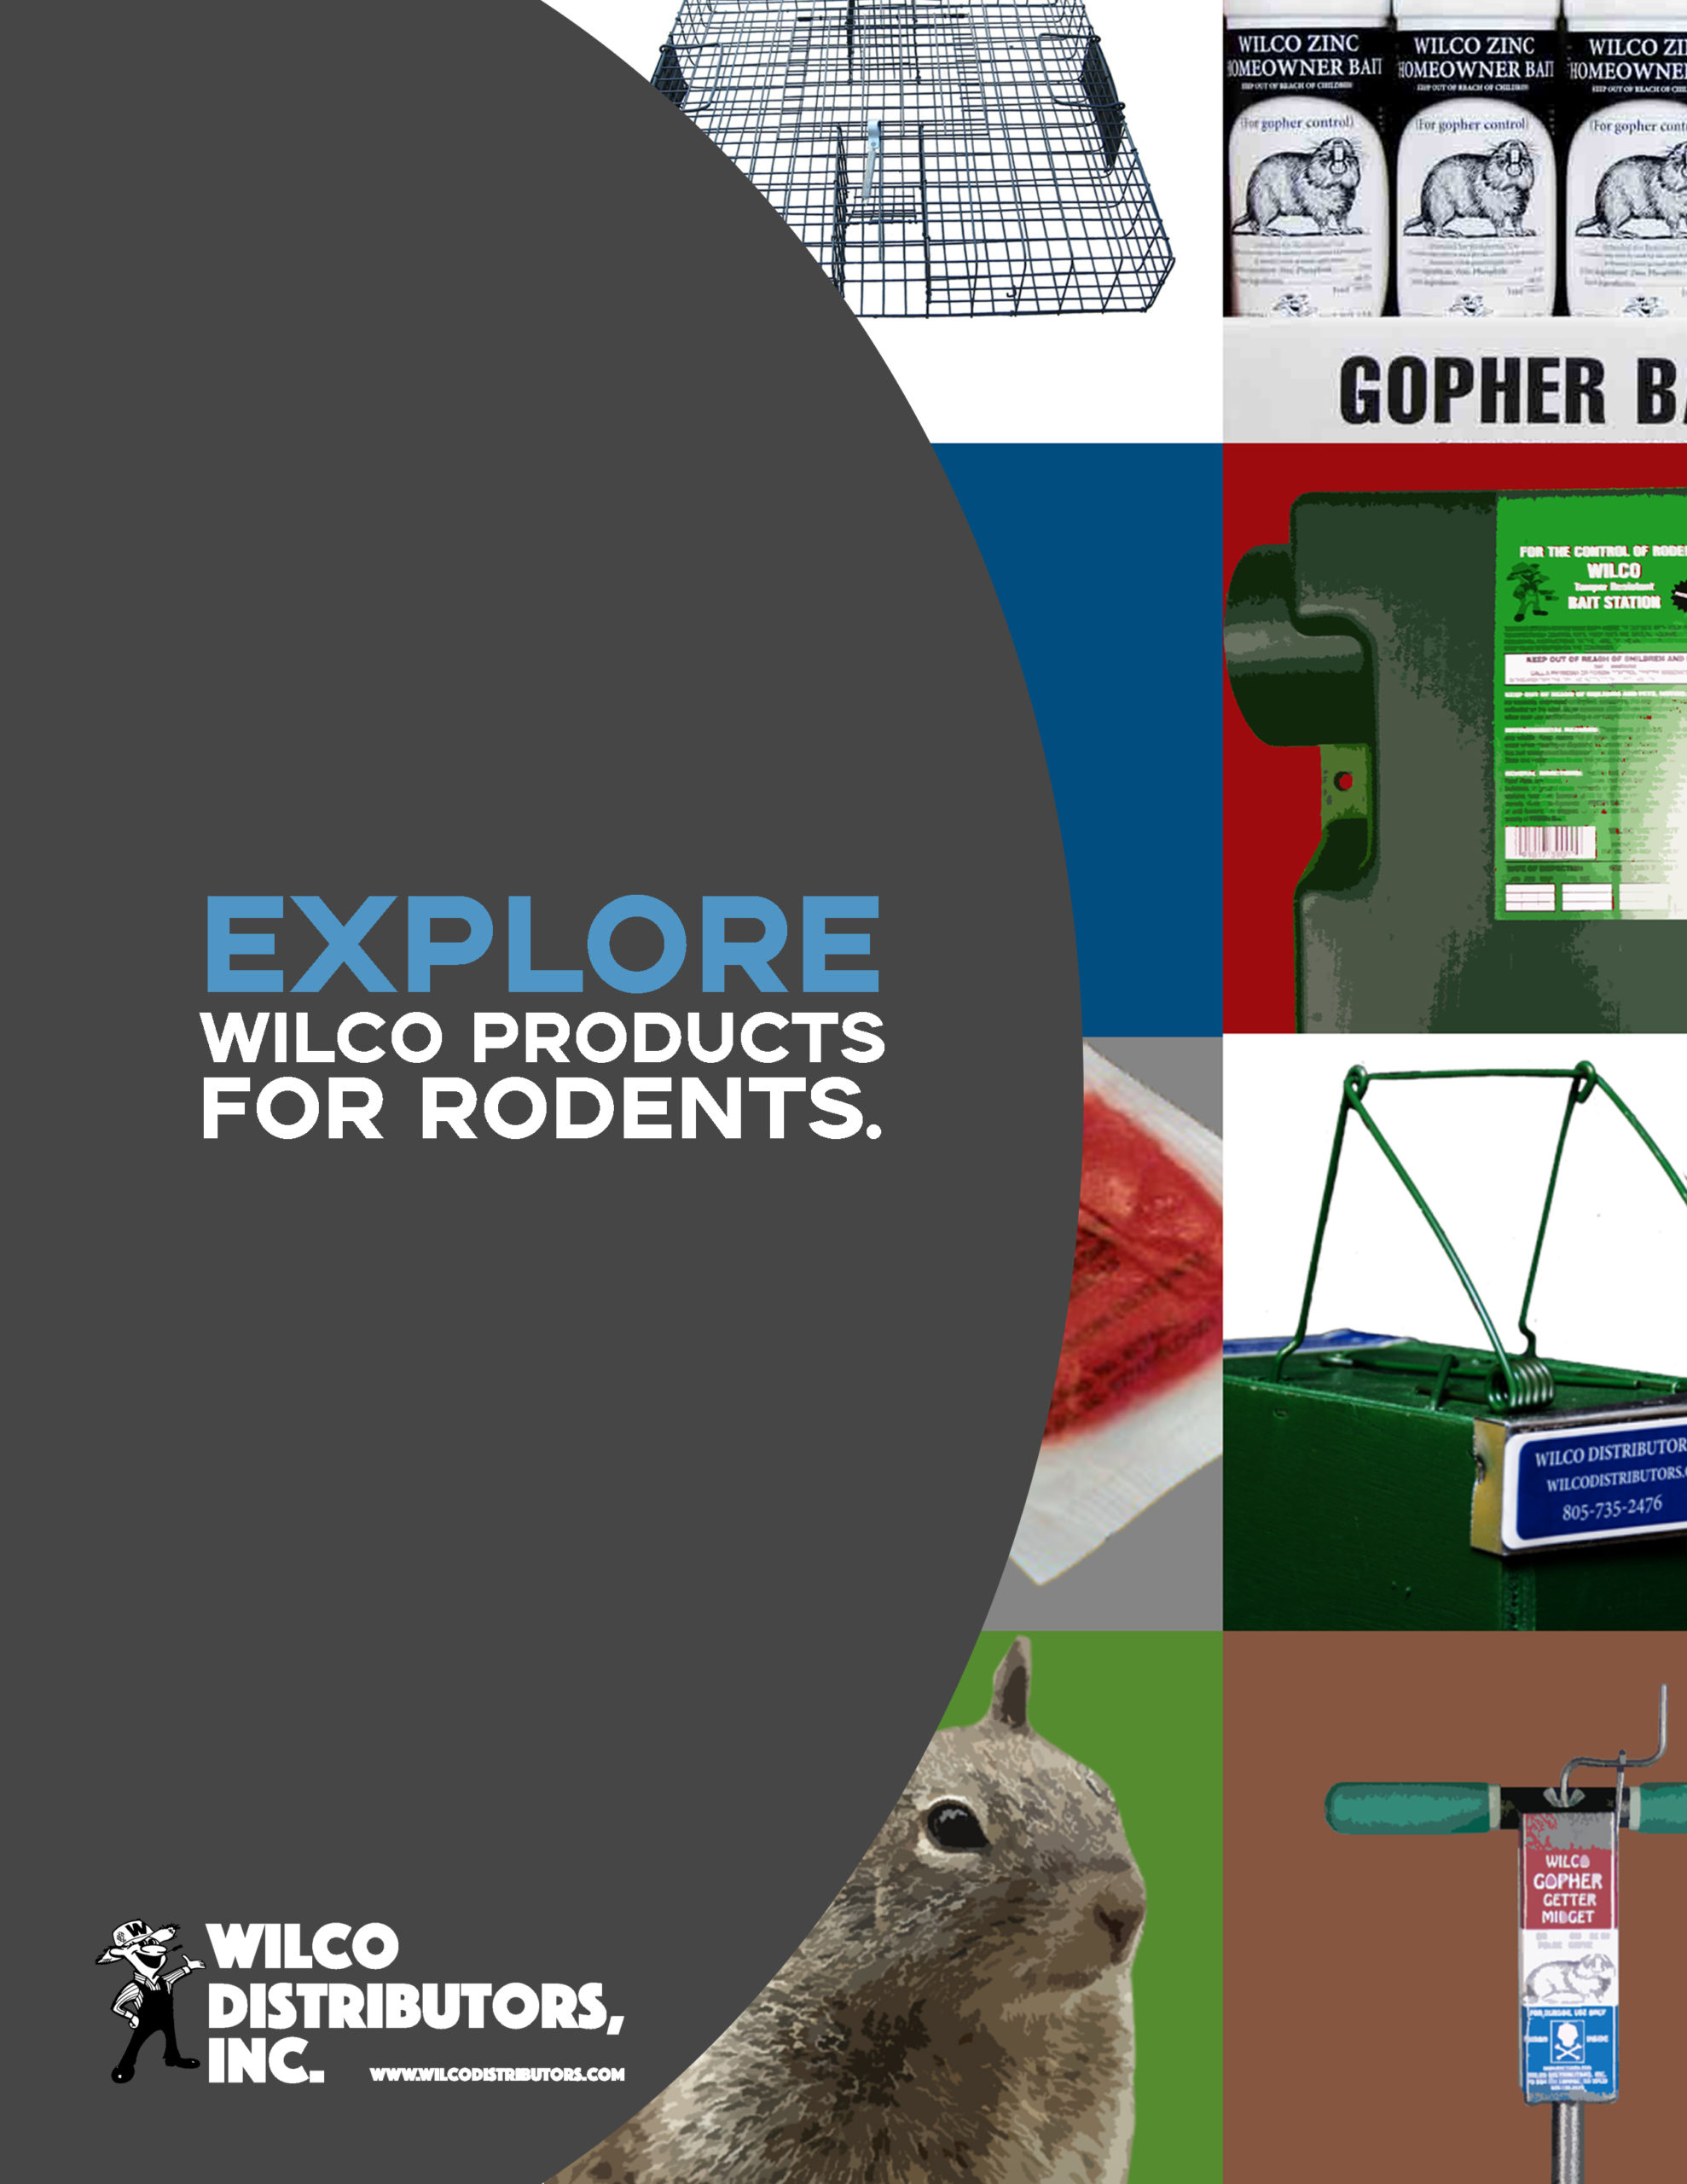 Explore Wilco products now!